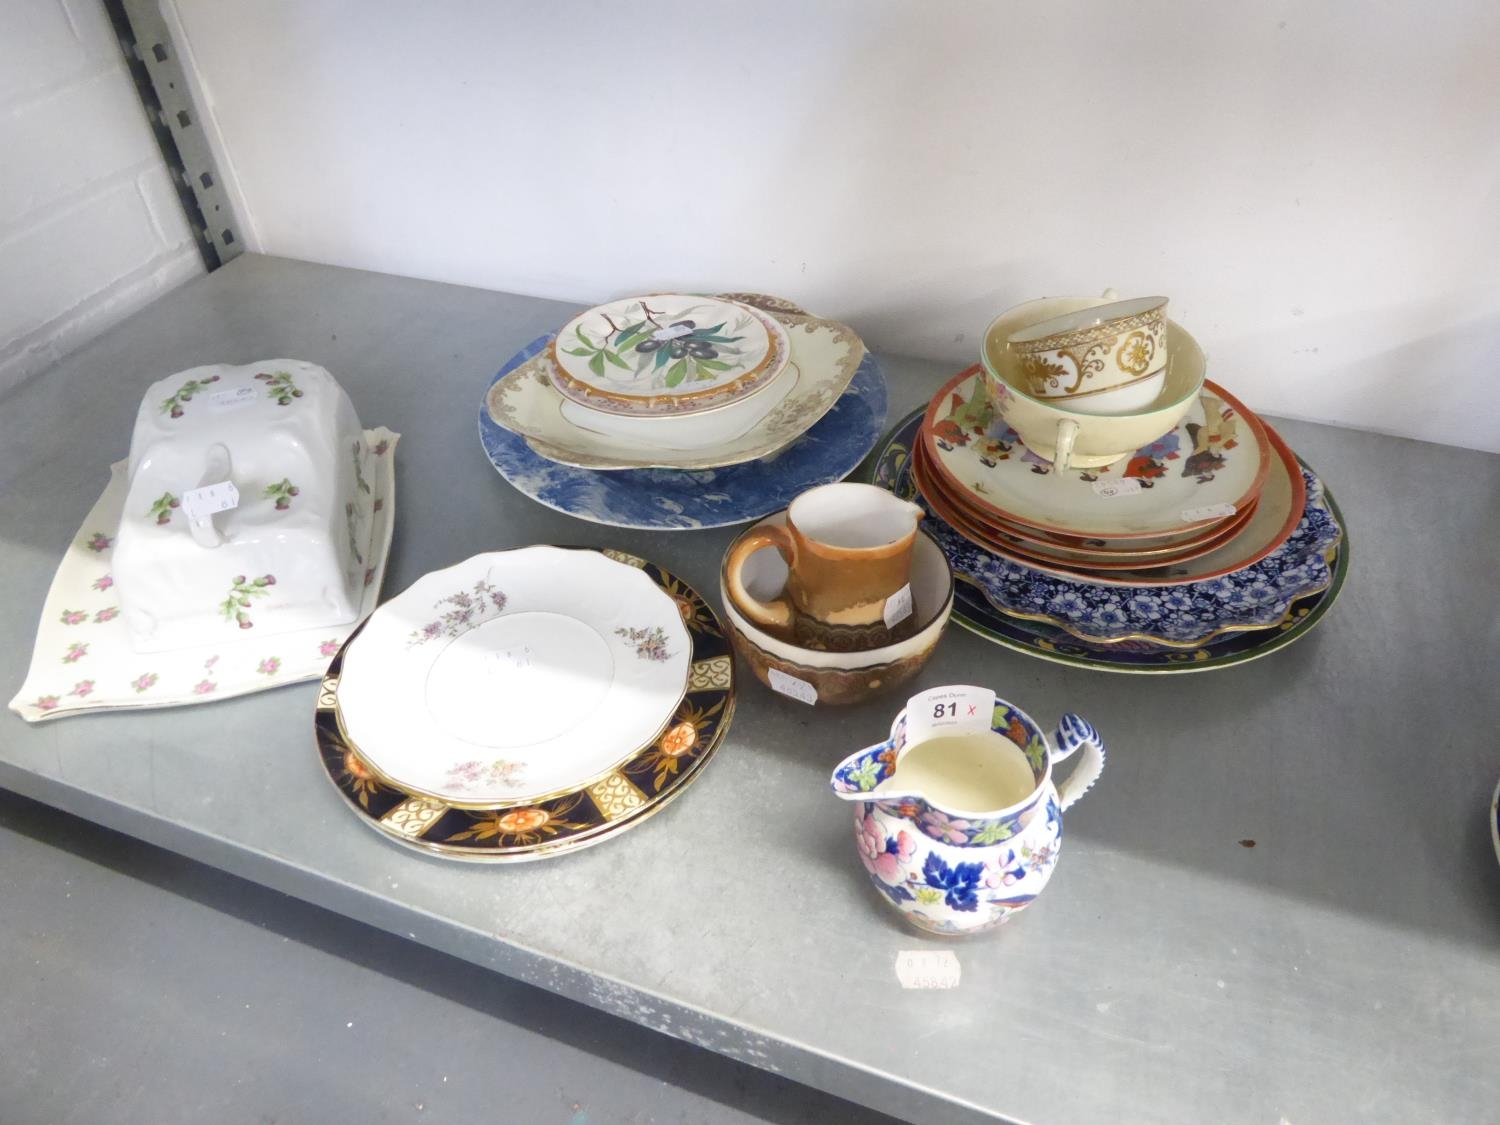 MIXED CHINA AND CERAMICS TO INCLUDE; BUTTER DISH AND COVER, WEDGWOOD LEAF EMBOSSED PLATE, JAPANESE